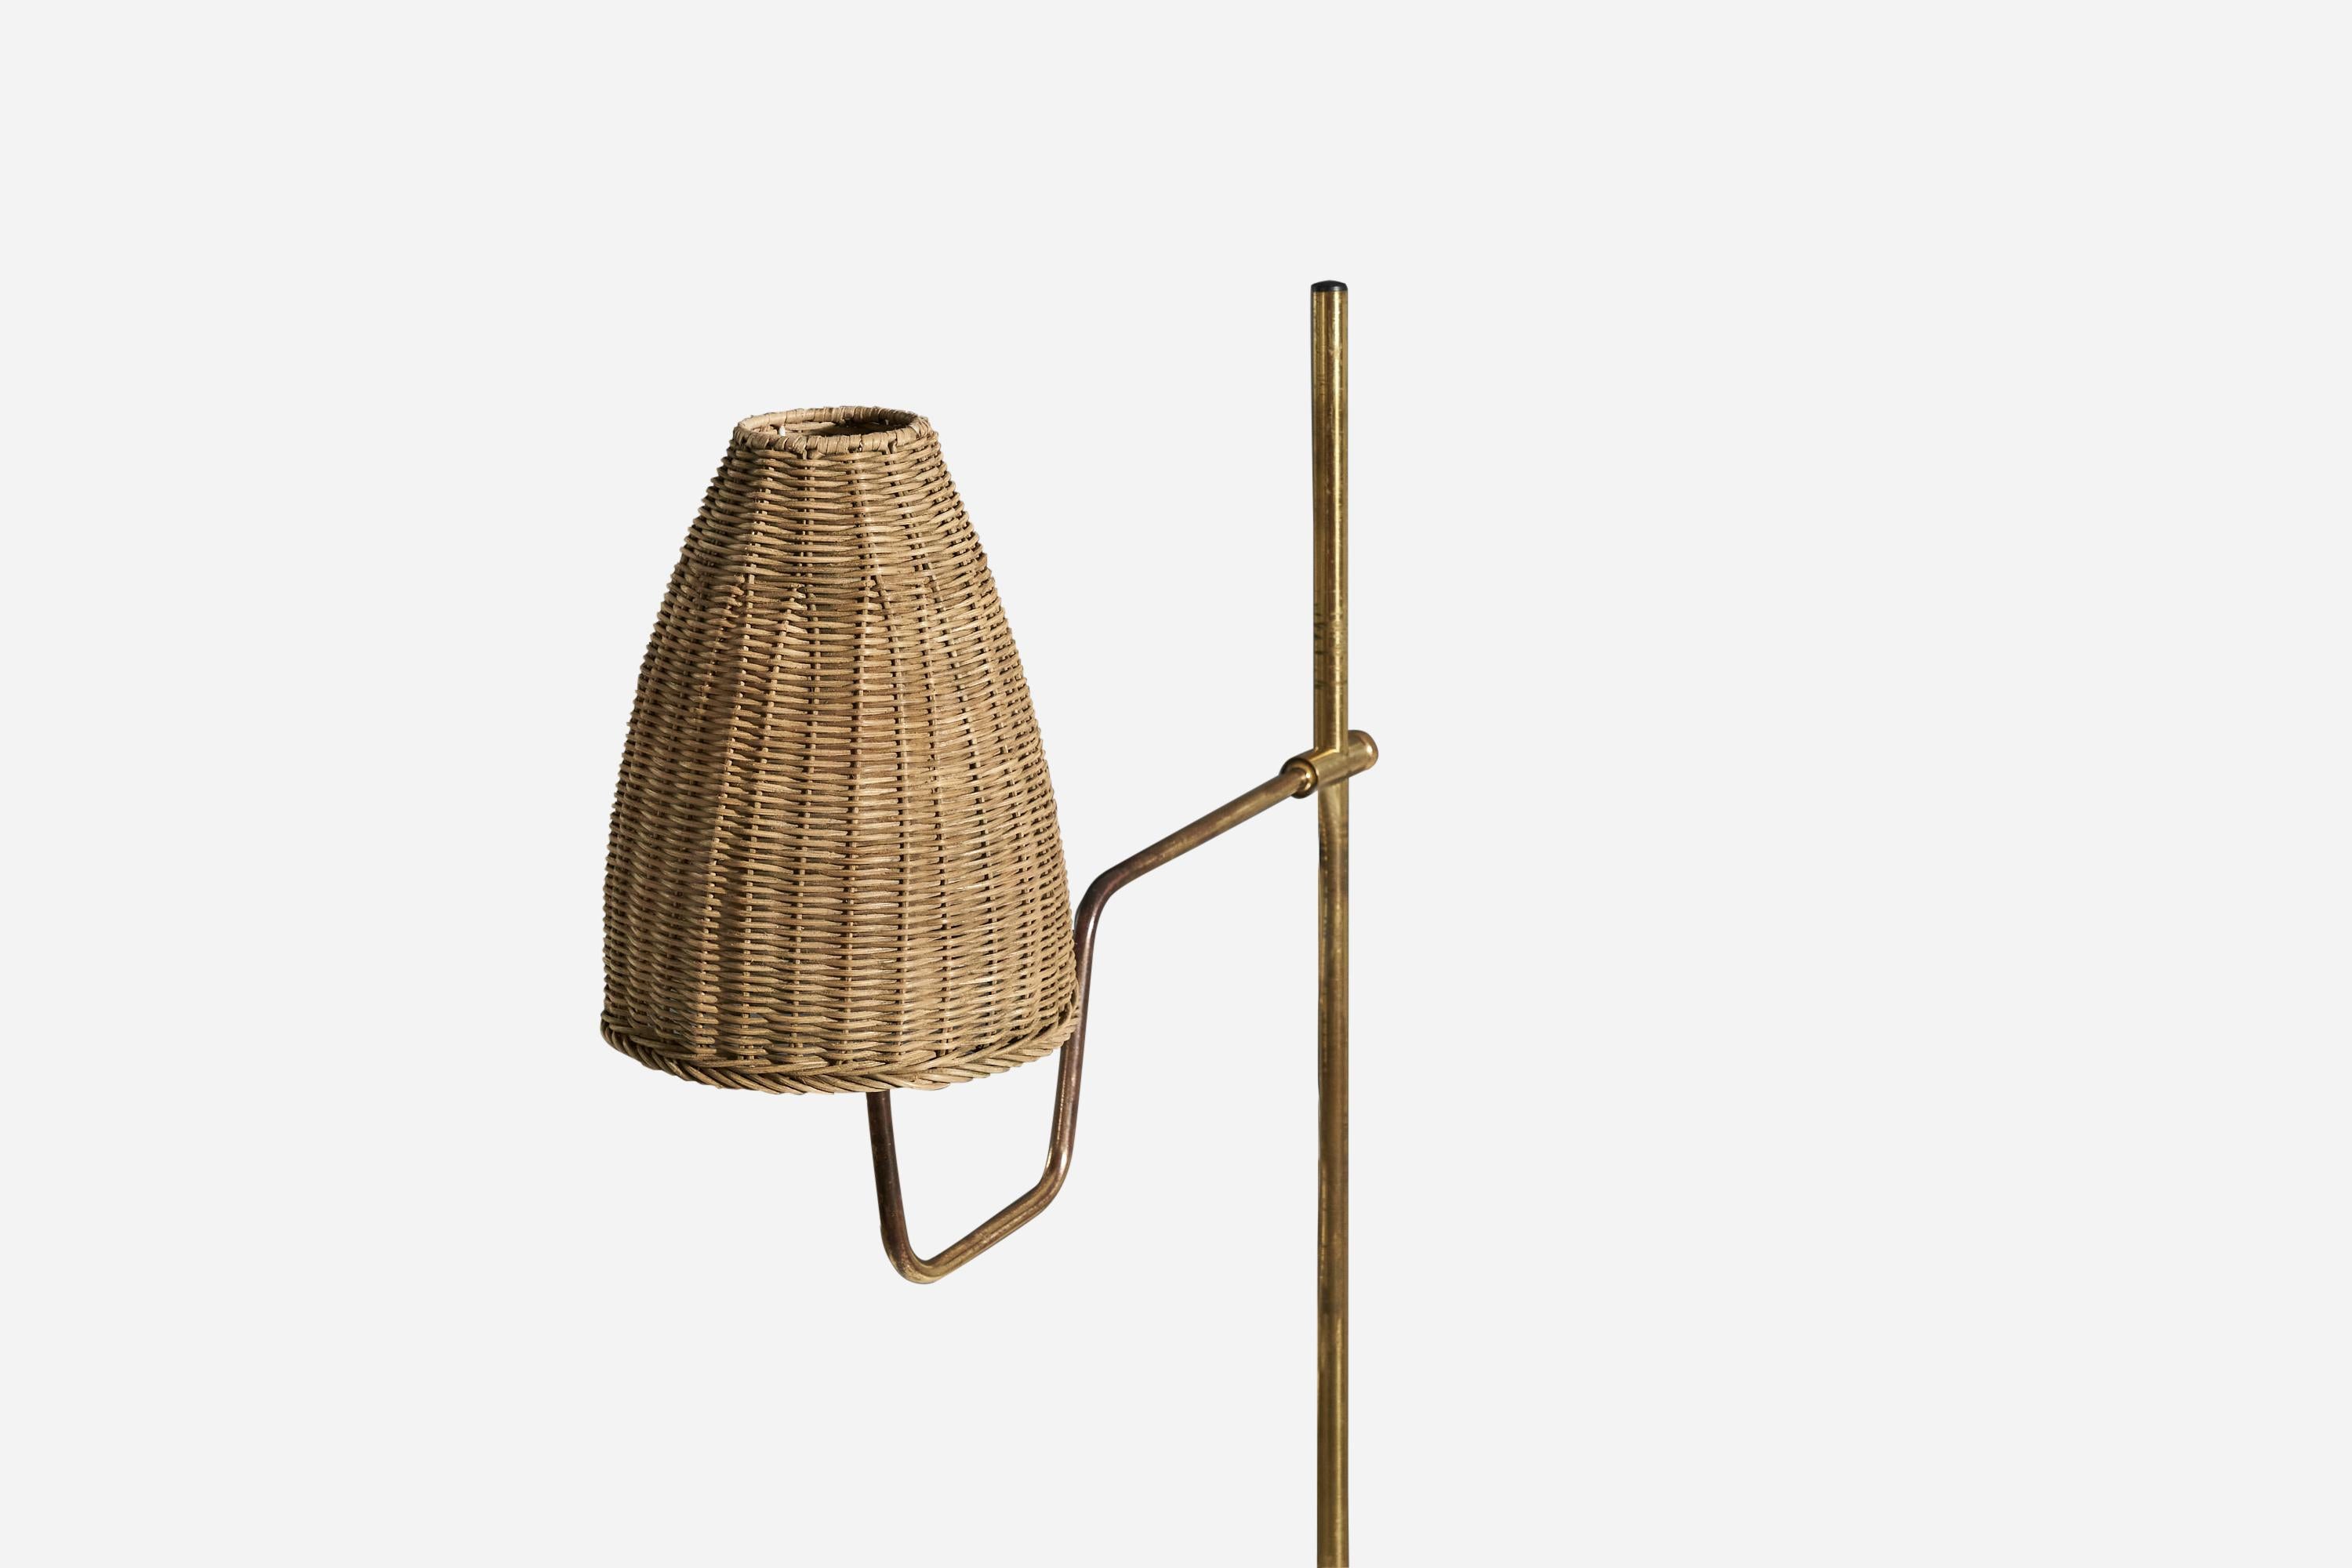 Hans-Agne Jakobsson, Adjustable Floor Lamp, Brass, Rattan, Sweden, c. 1970s In Good Condition For Sale In High Point, NC